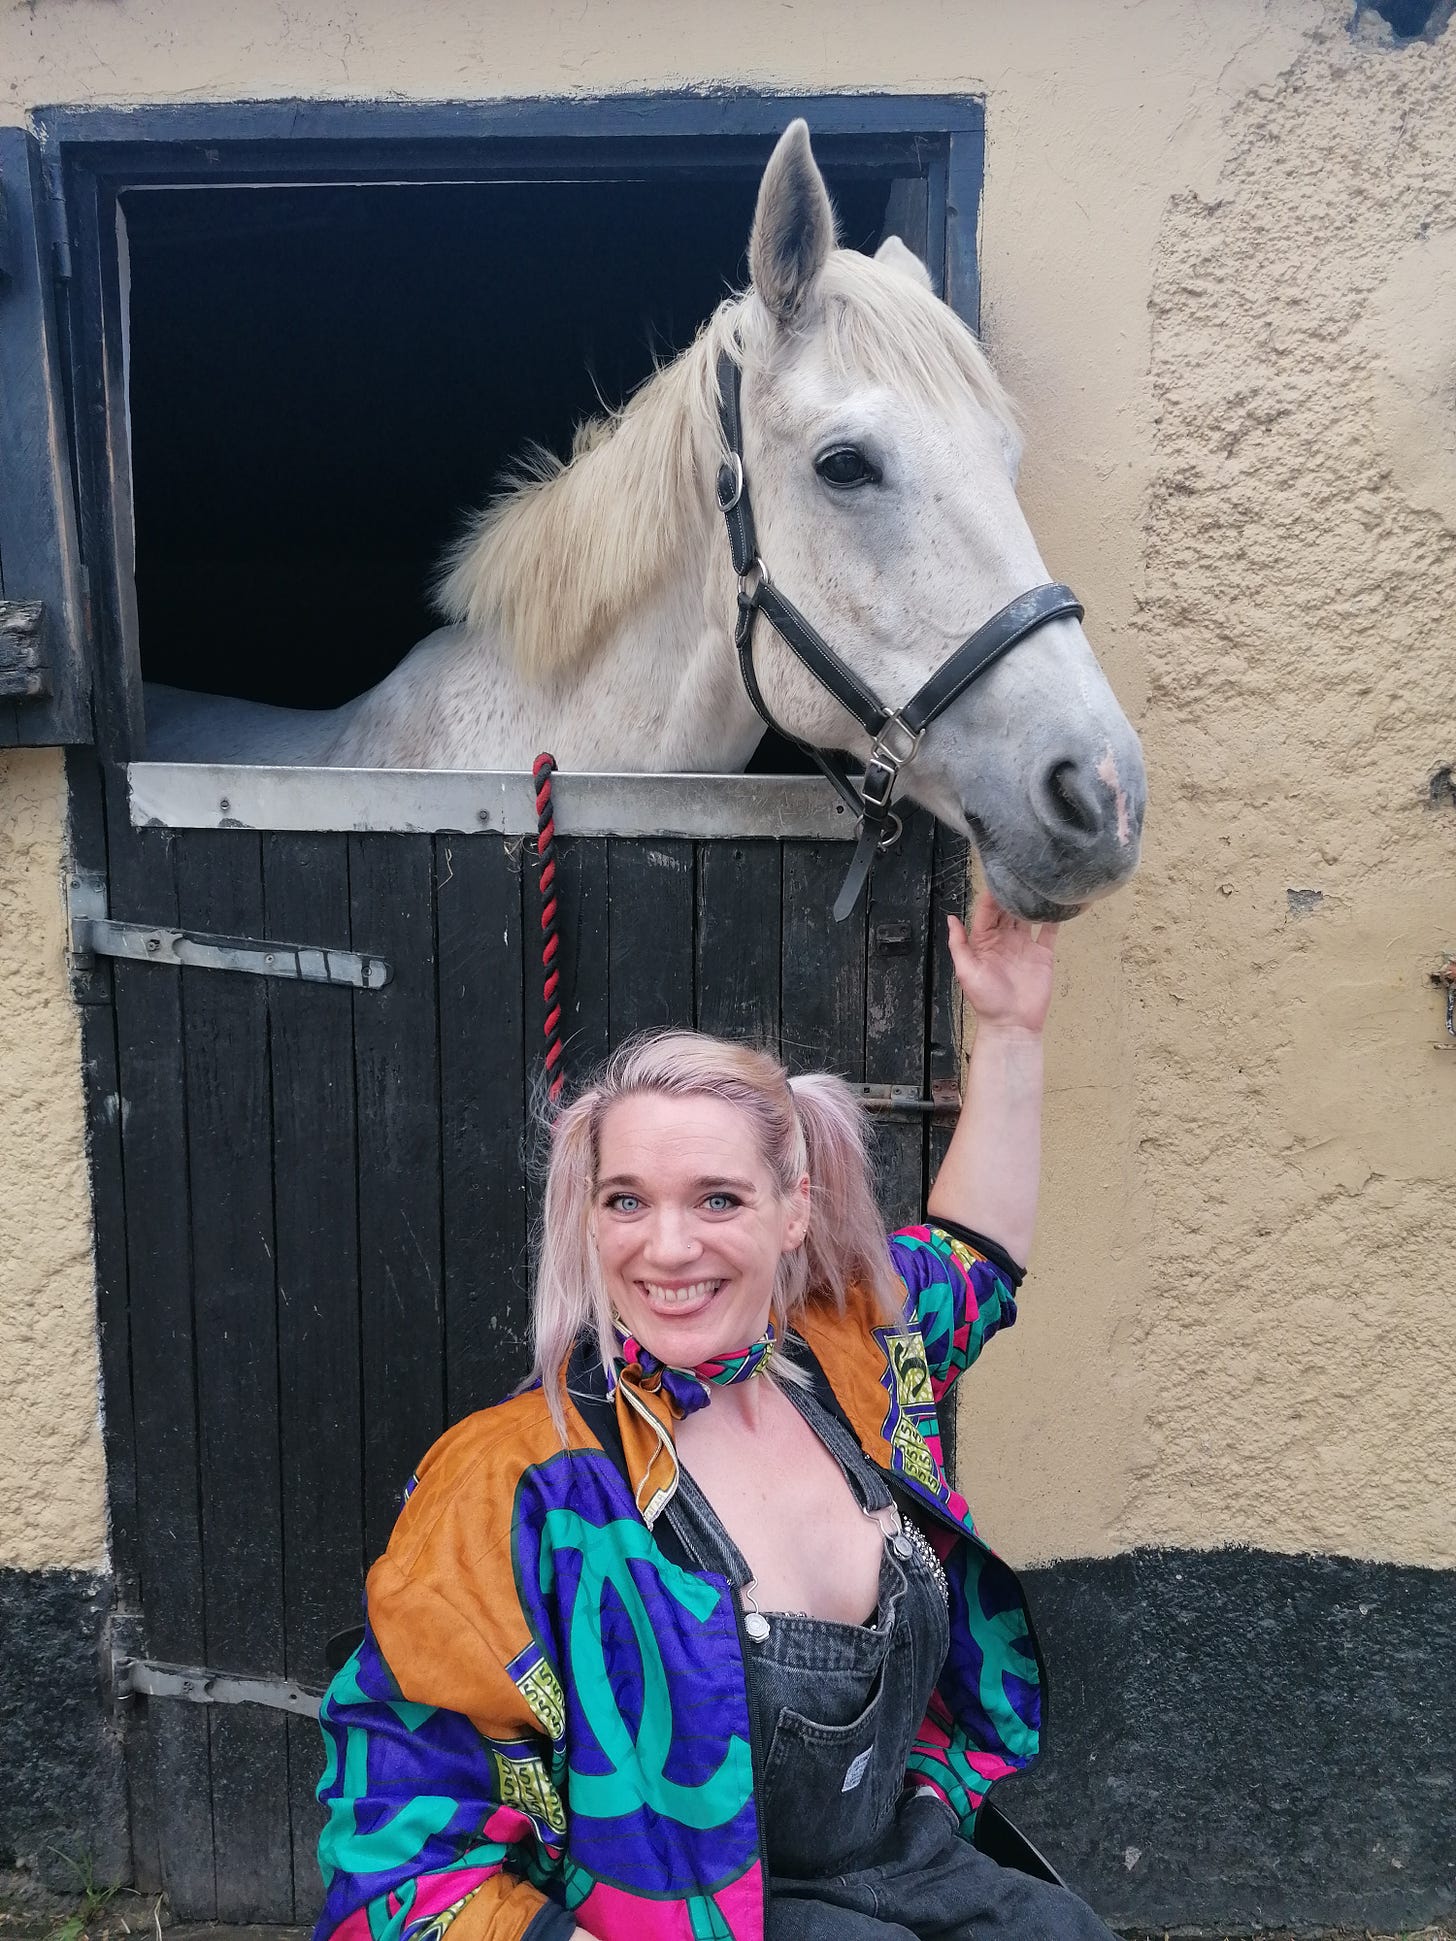 Wearing my long blonde hair in pigtails, and donning a pair of denim dungarees and a colourful bomber jacket, I reach up to pet the nuzzle of grey pony whose head peers over a stable door. 